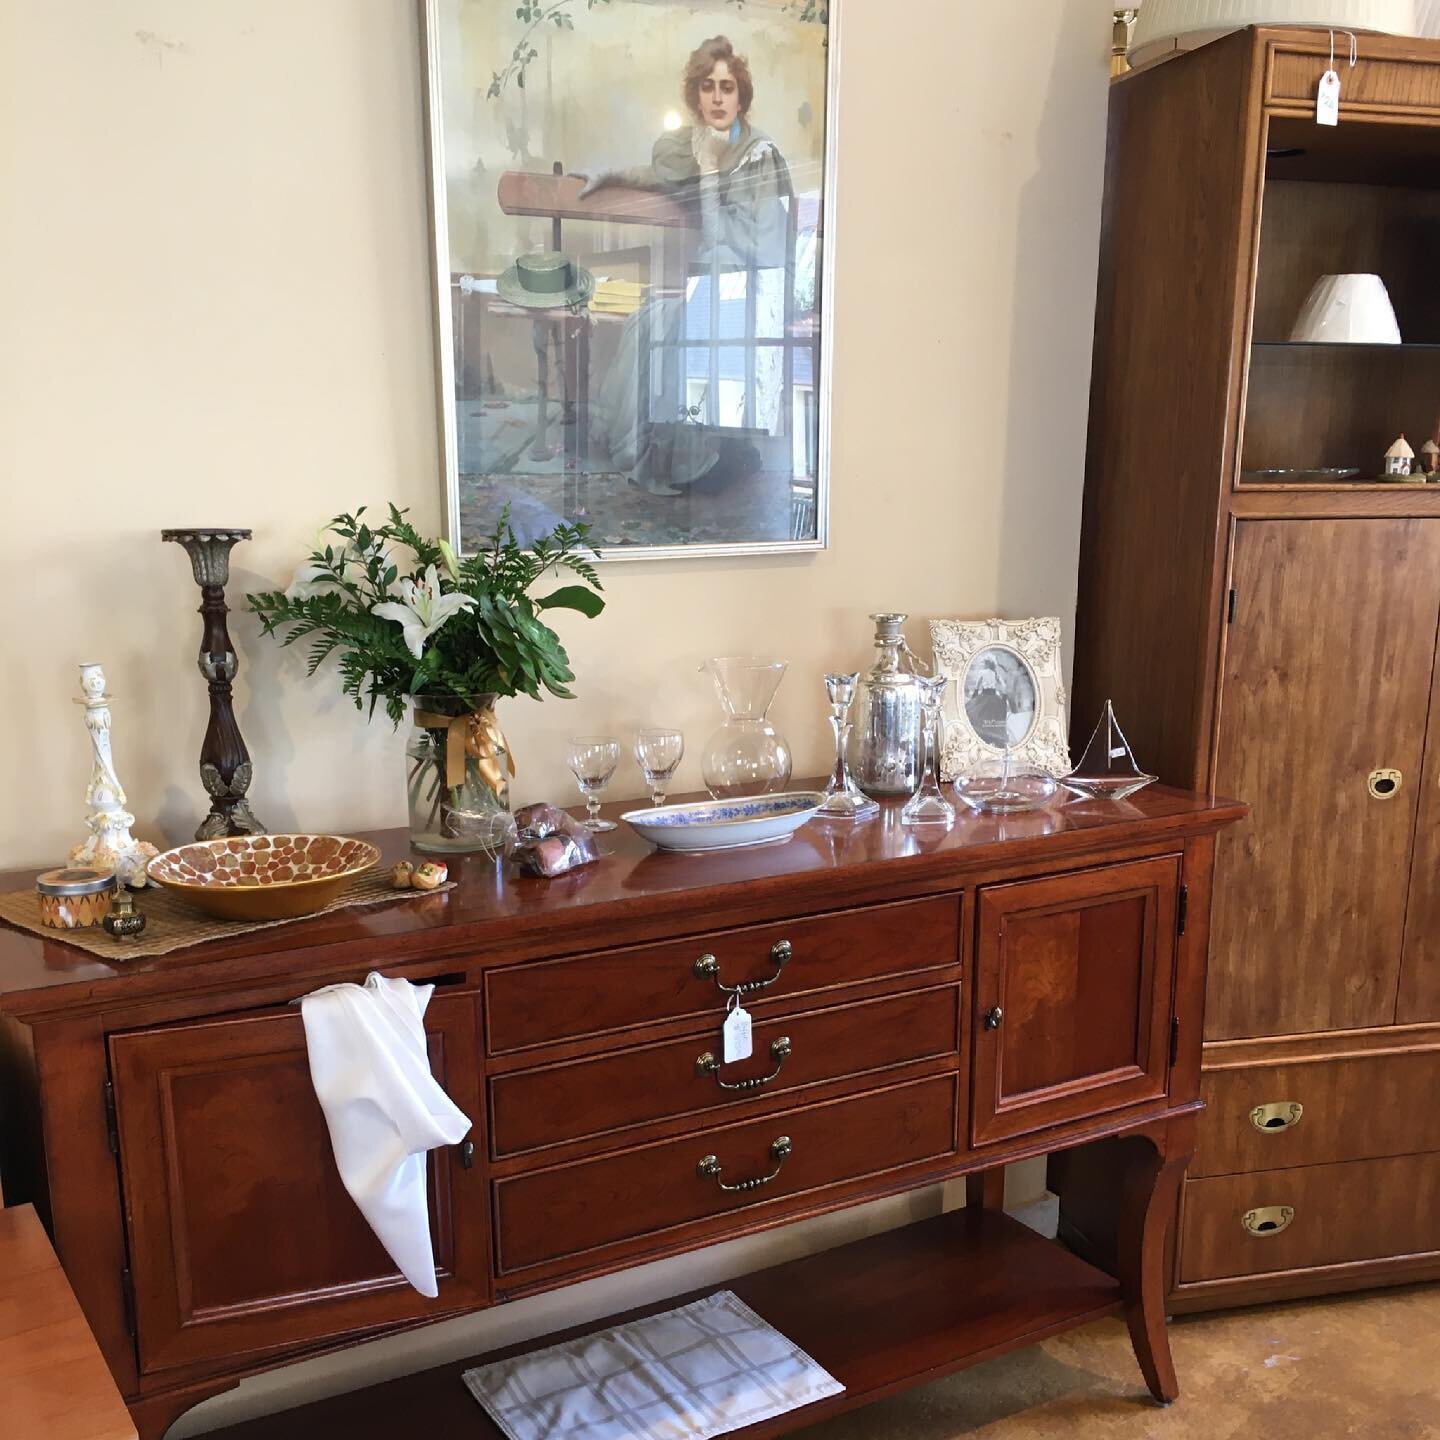 Lovely new inventory for all your home redecorating and organizing needs. Our beautiful, lightly used inventory is priced to sell. 

Come check us our, Monday-Saturday 10-4. 

#thrifting #carmelthrifting #carmel #carmelbythesea #carmelcalifornia #mon